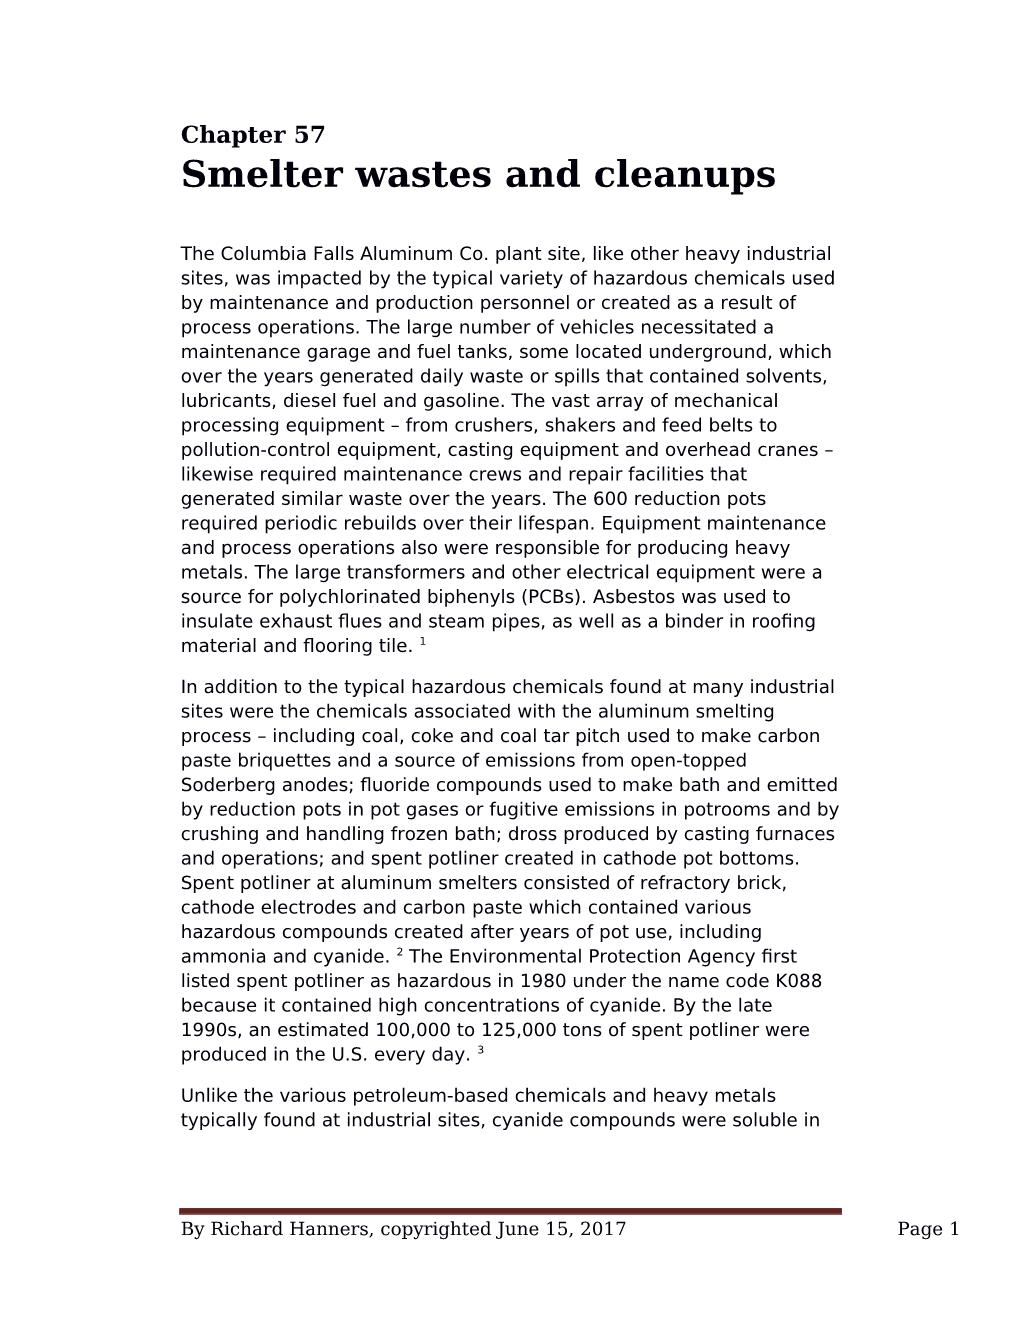 Chapter 57 – Smelter Wastes and Cleanups